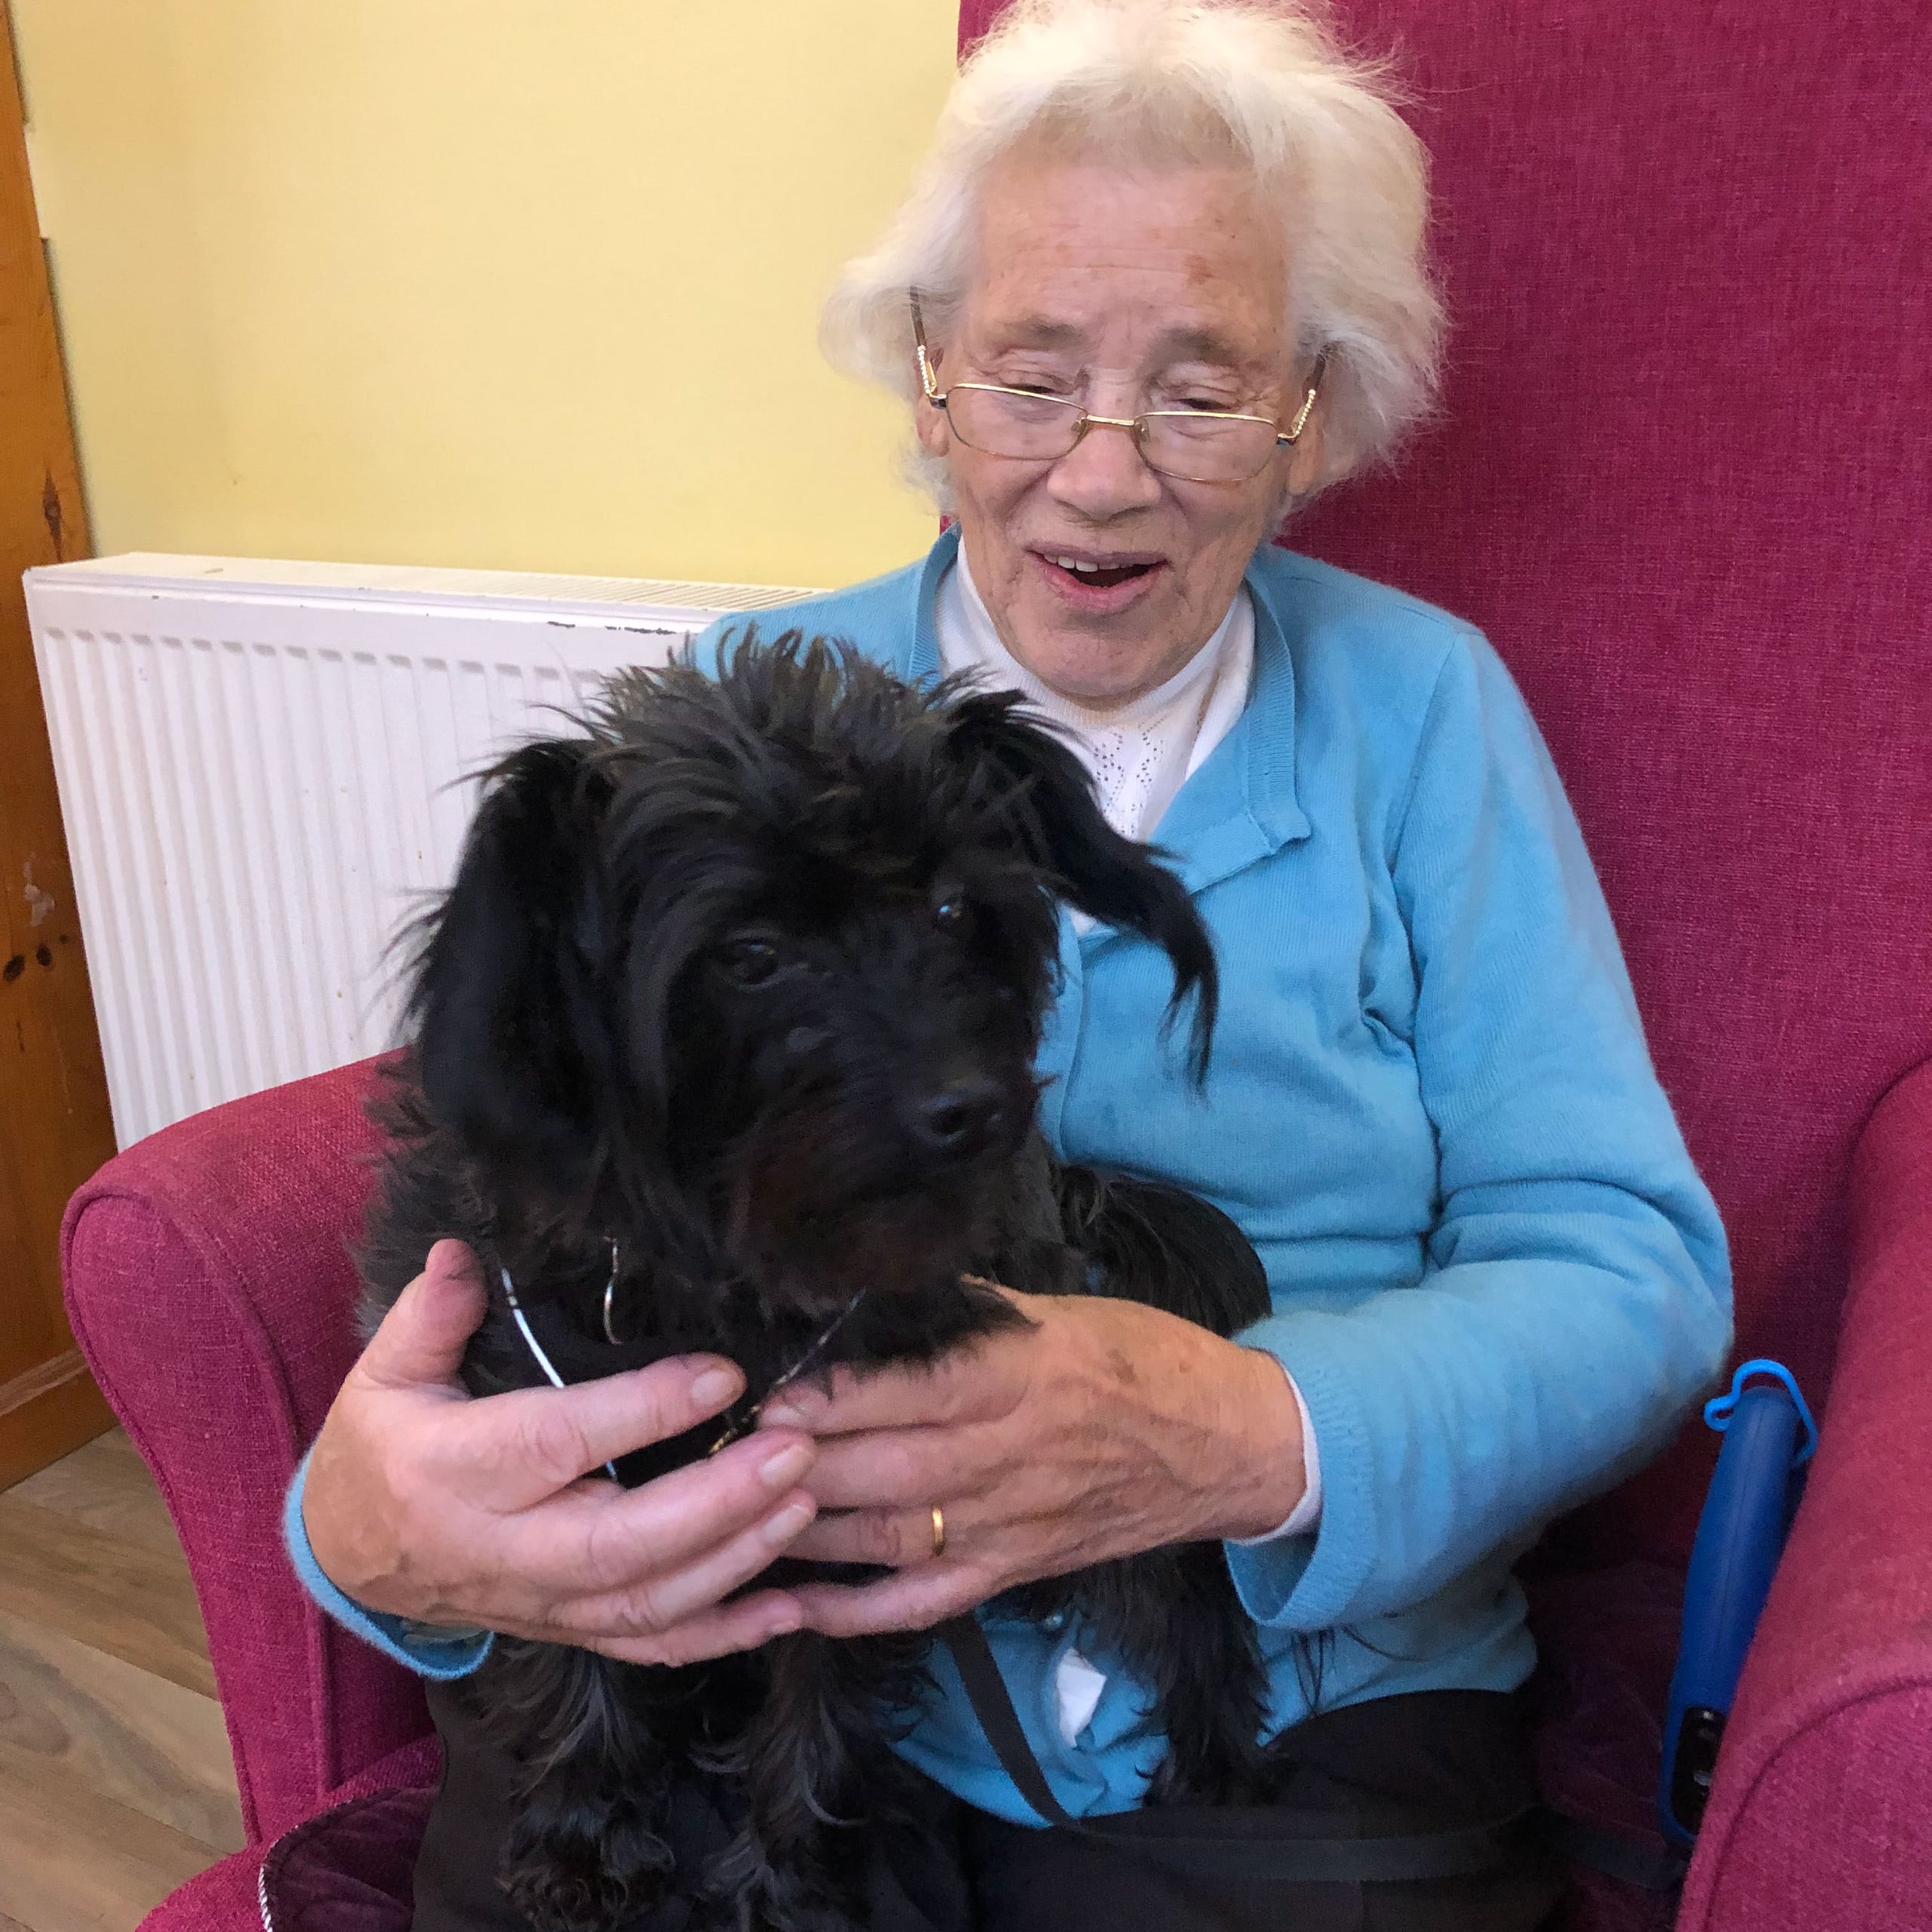 Pet therapy pup Noodle the dog visits Linden House to surprise residents just before Christmas.